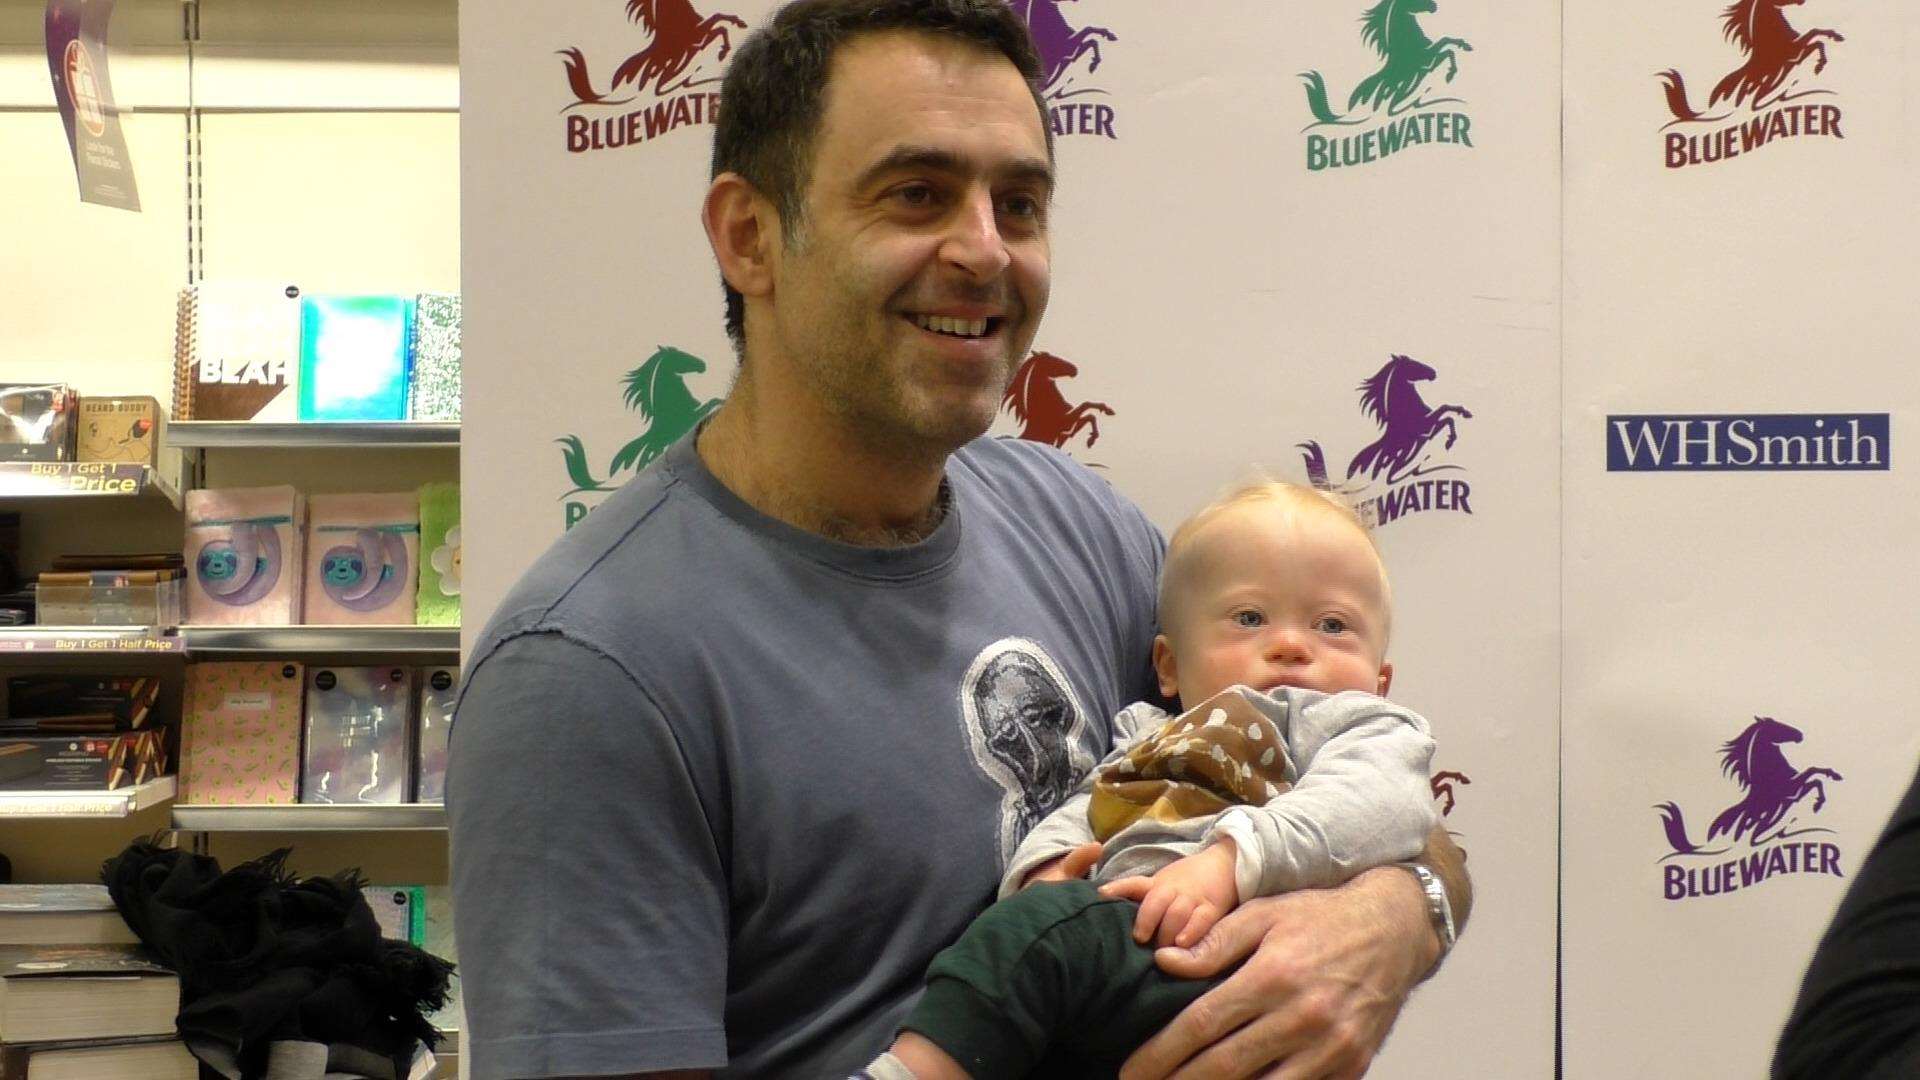 Ronnie O'Sullivan also met a young fan at the book signing